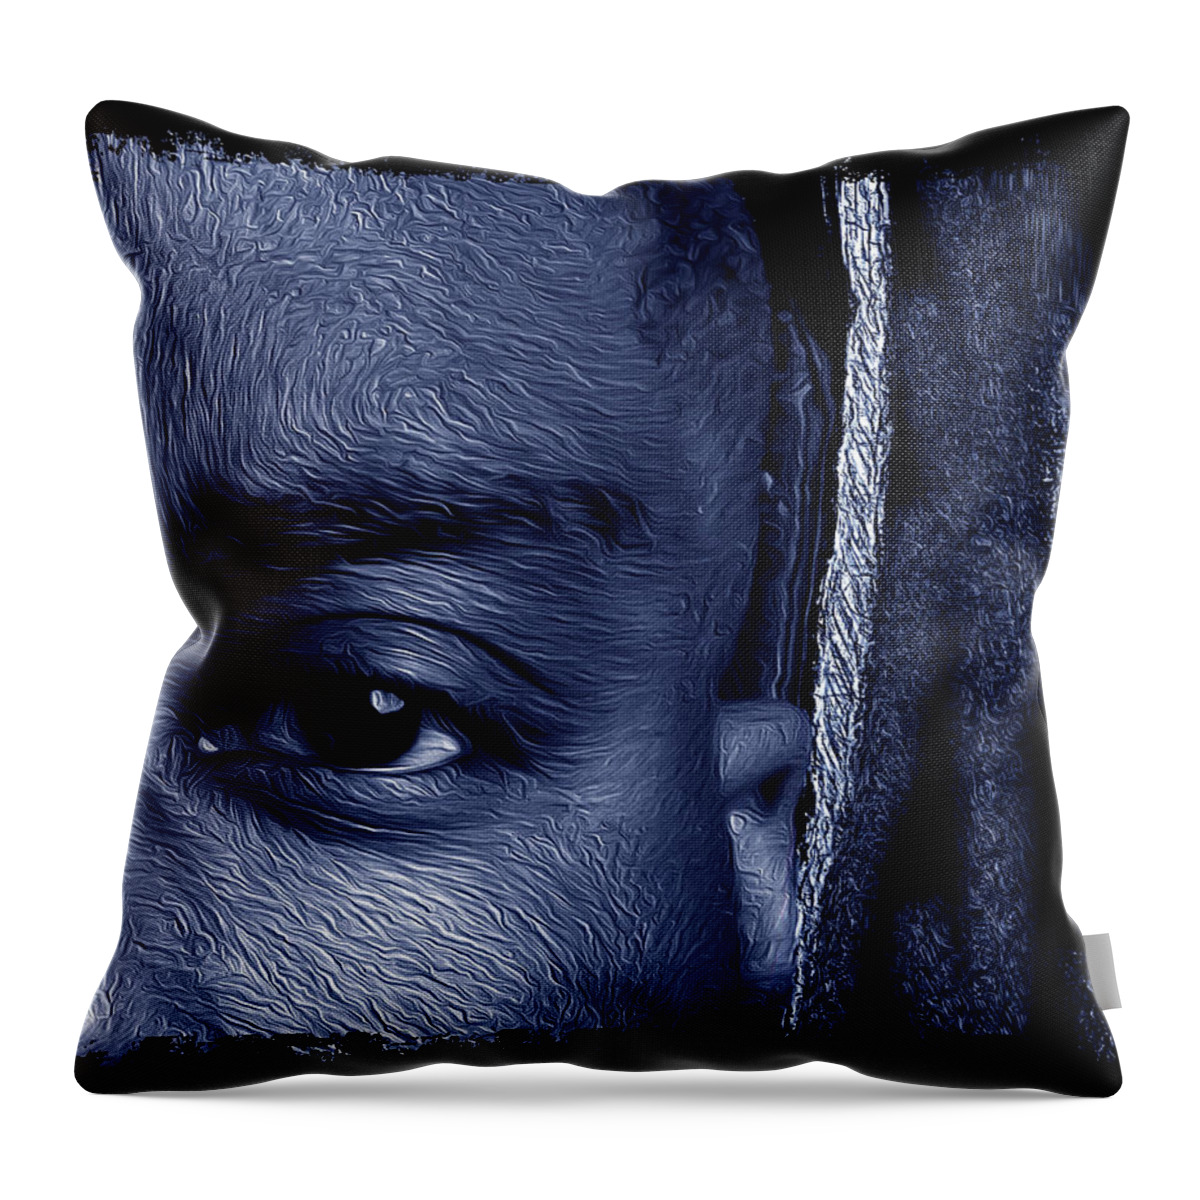 Shades Collection 2 Throw Pillow featuring the digital art Shades of Black 4 by Aldane Wynter